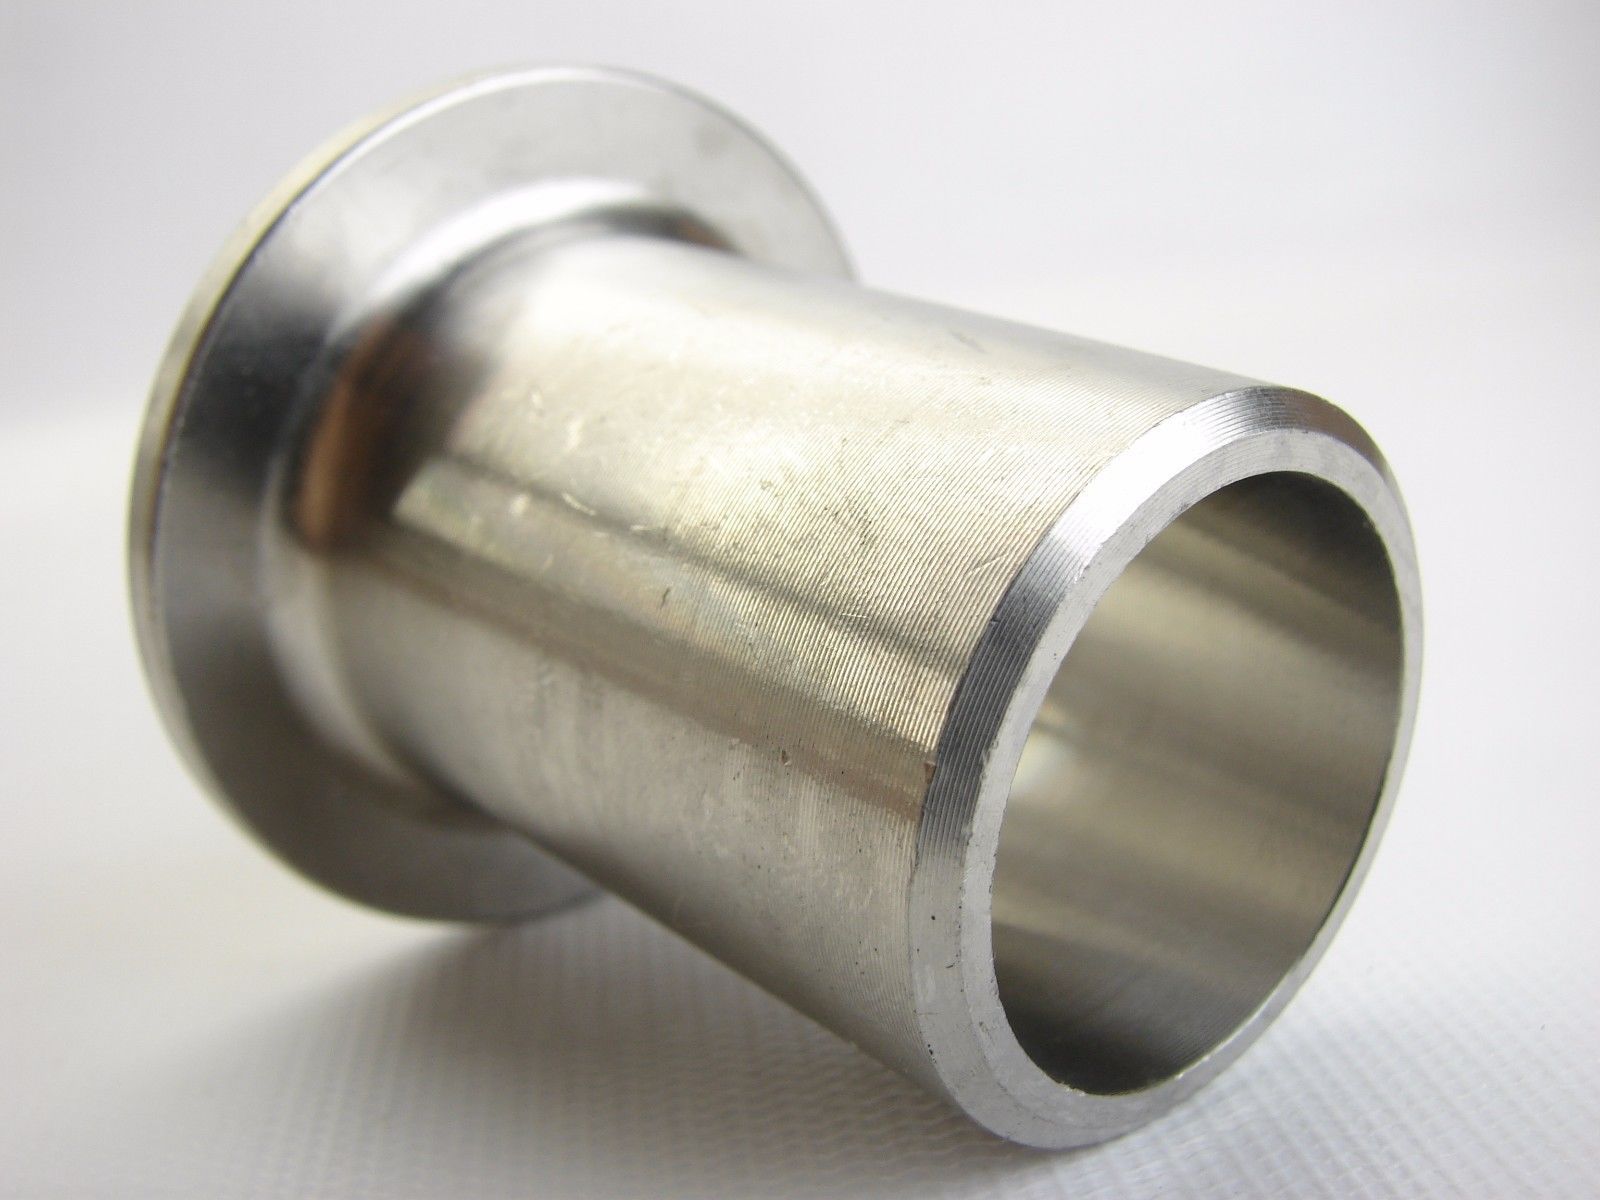 New Stainless Steel Stub End Butt Weld Fitting 1 Sch40s Spi Mss Sp 43 316316l Other Business 8735